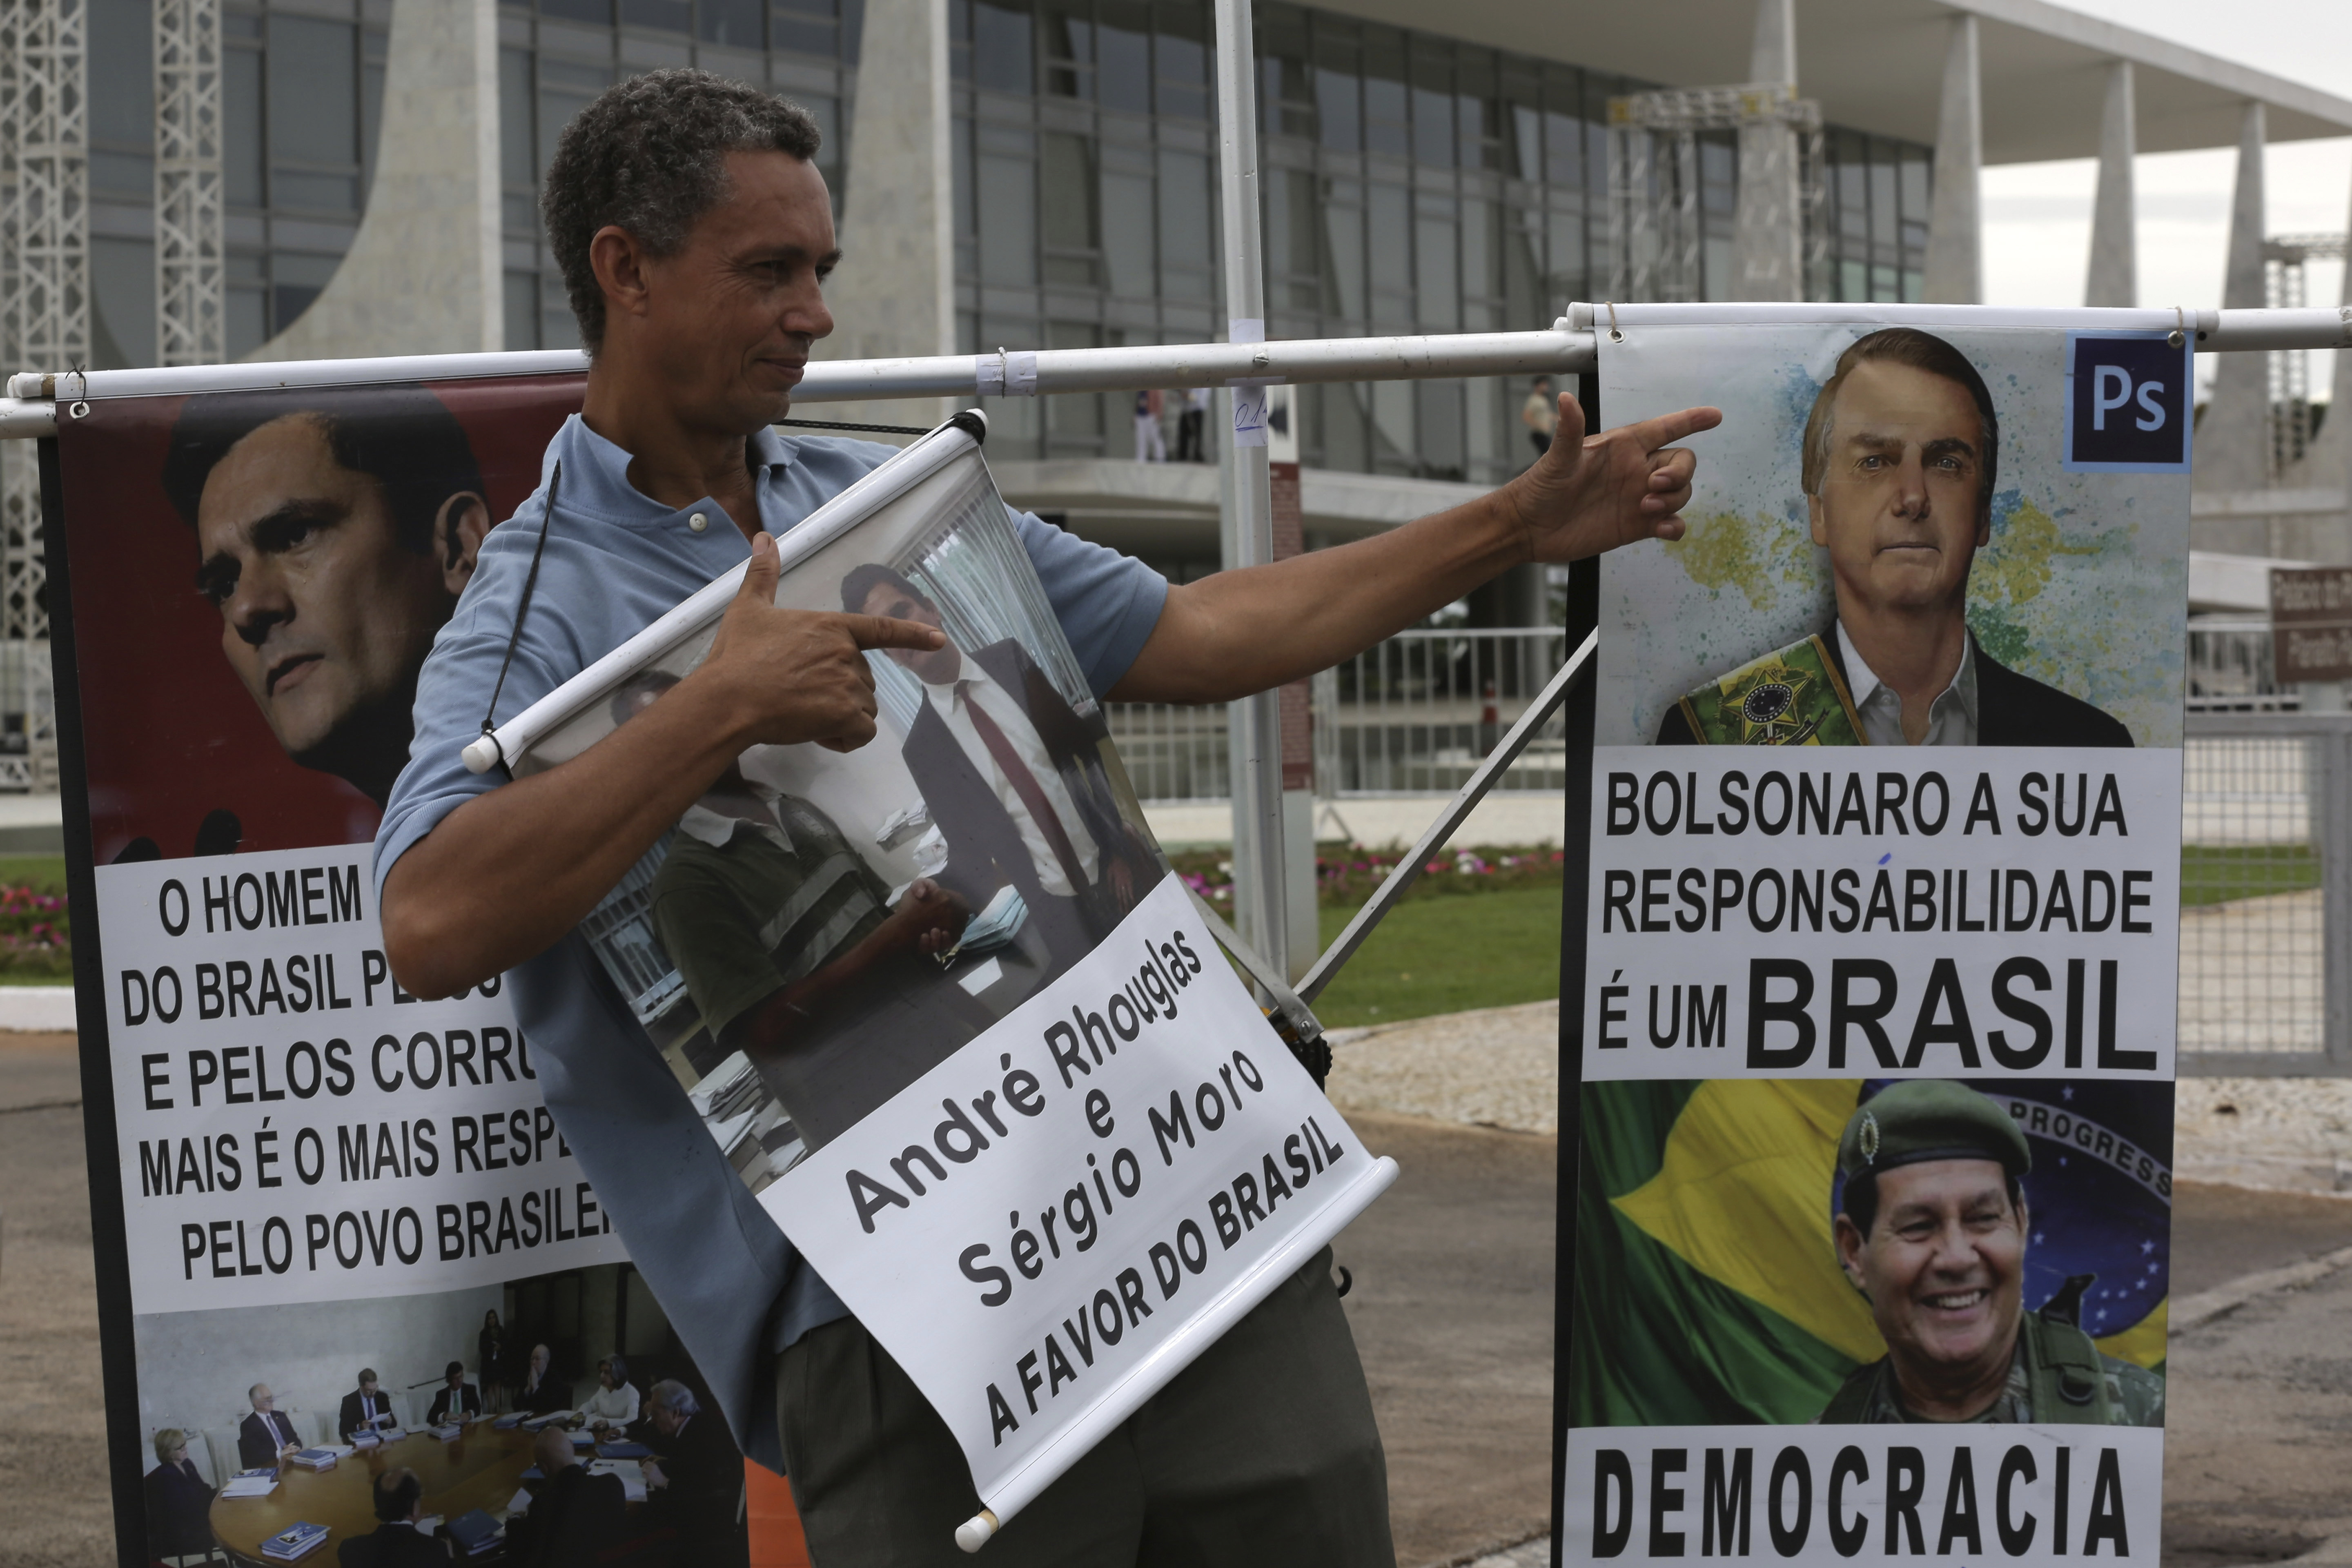 Andre Rhouglas, a supporter of Brazil's President-elect Jair Bolsonaro, flashes finger guns in front of posters featuring Bolsonaro and Vice President-elect Gen. Hamilton Mourao, in front of the Planalto Presidential Palace, in Brasilia, Brazil, Friday, Dec. 28, 2018. The Secretary of Public Security in Brasilia said that they are expecting as many as 500,000 people to attend the presidential inaugural festivities. Brazil's military has deployed anti-aircraft missiles and fighter jets to protect the event from the air. On the ground, more than 3,000 police and military will take to the streets. (AP Photo/Eraldo Peres)